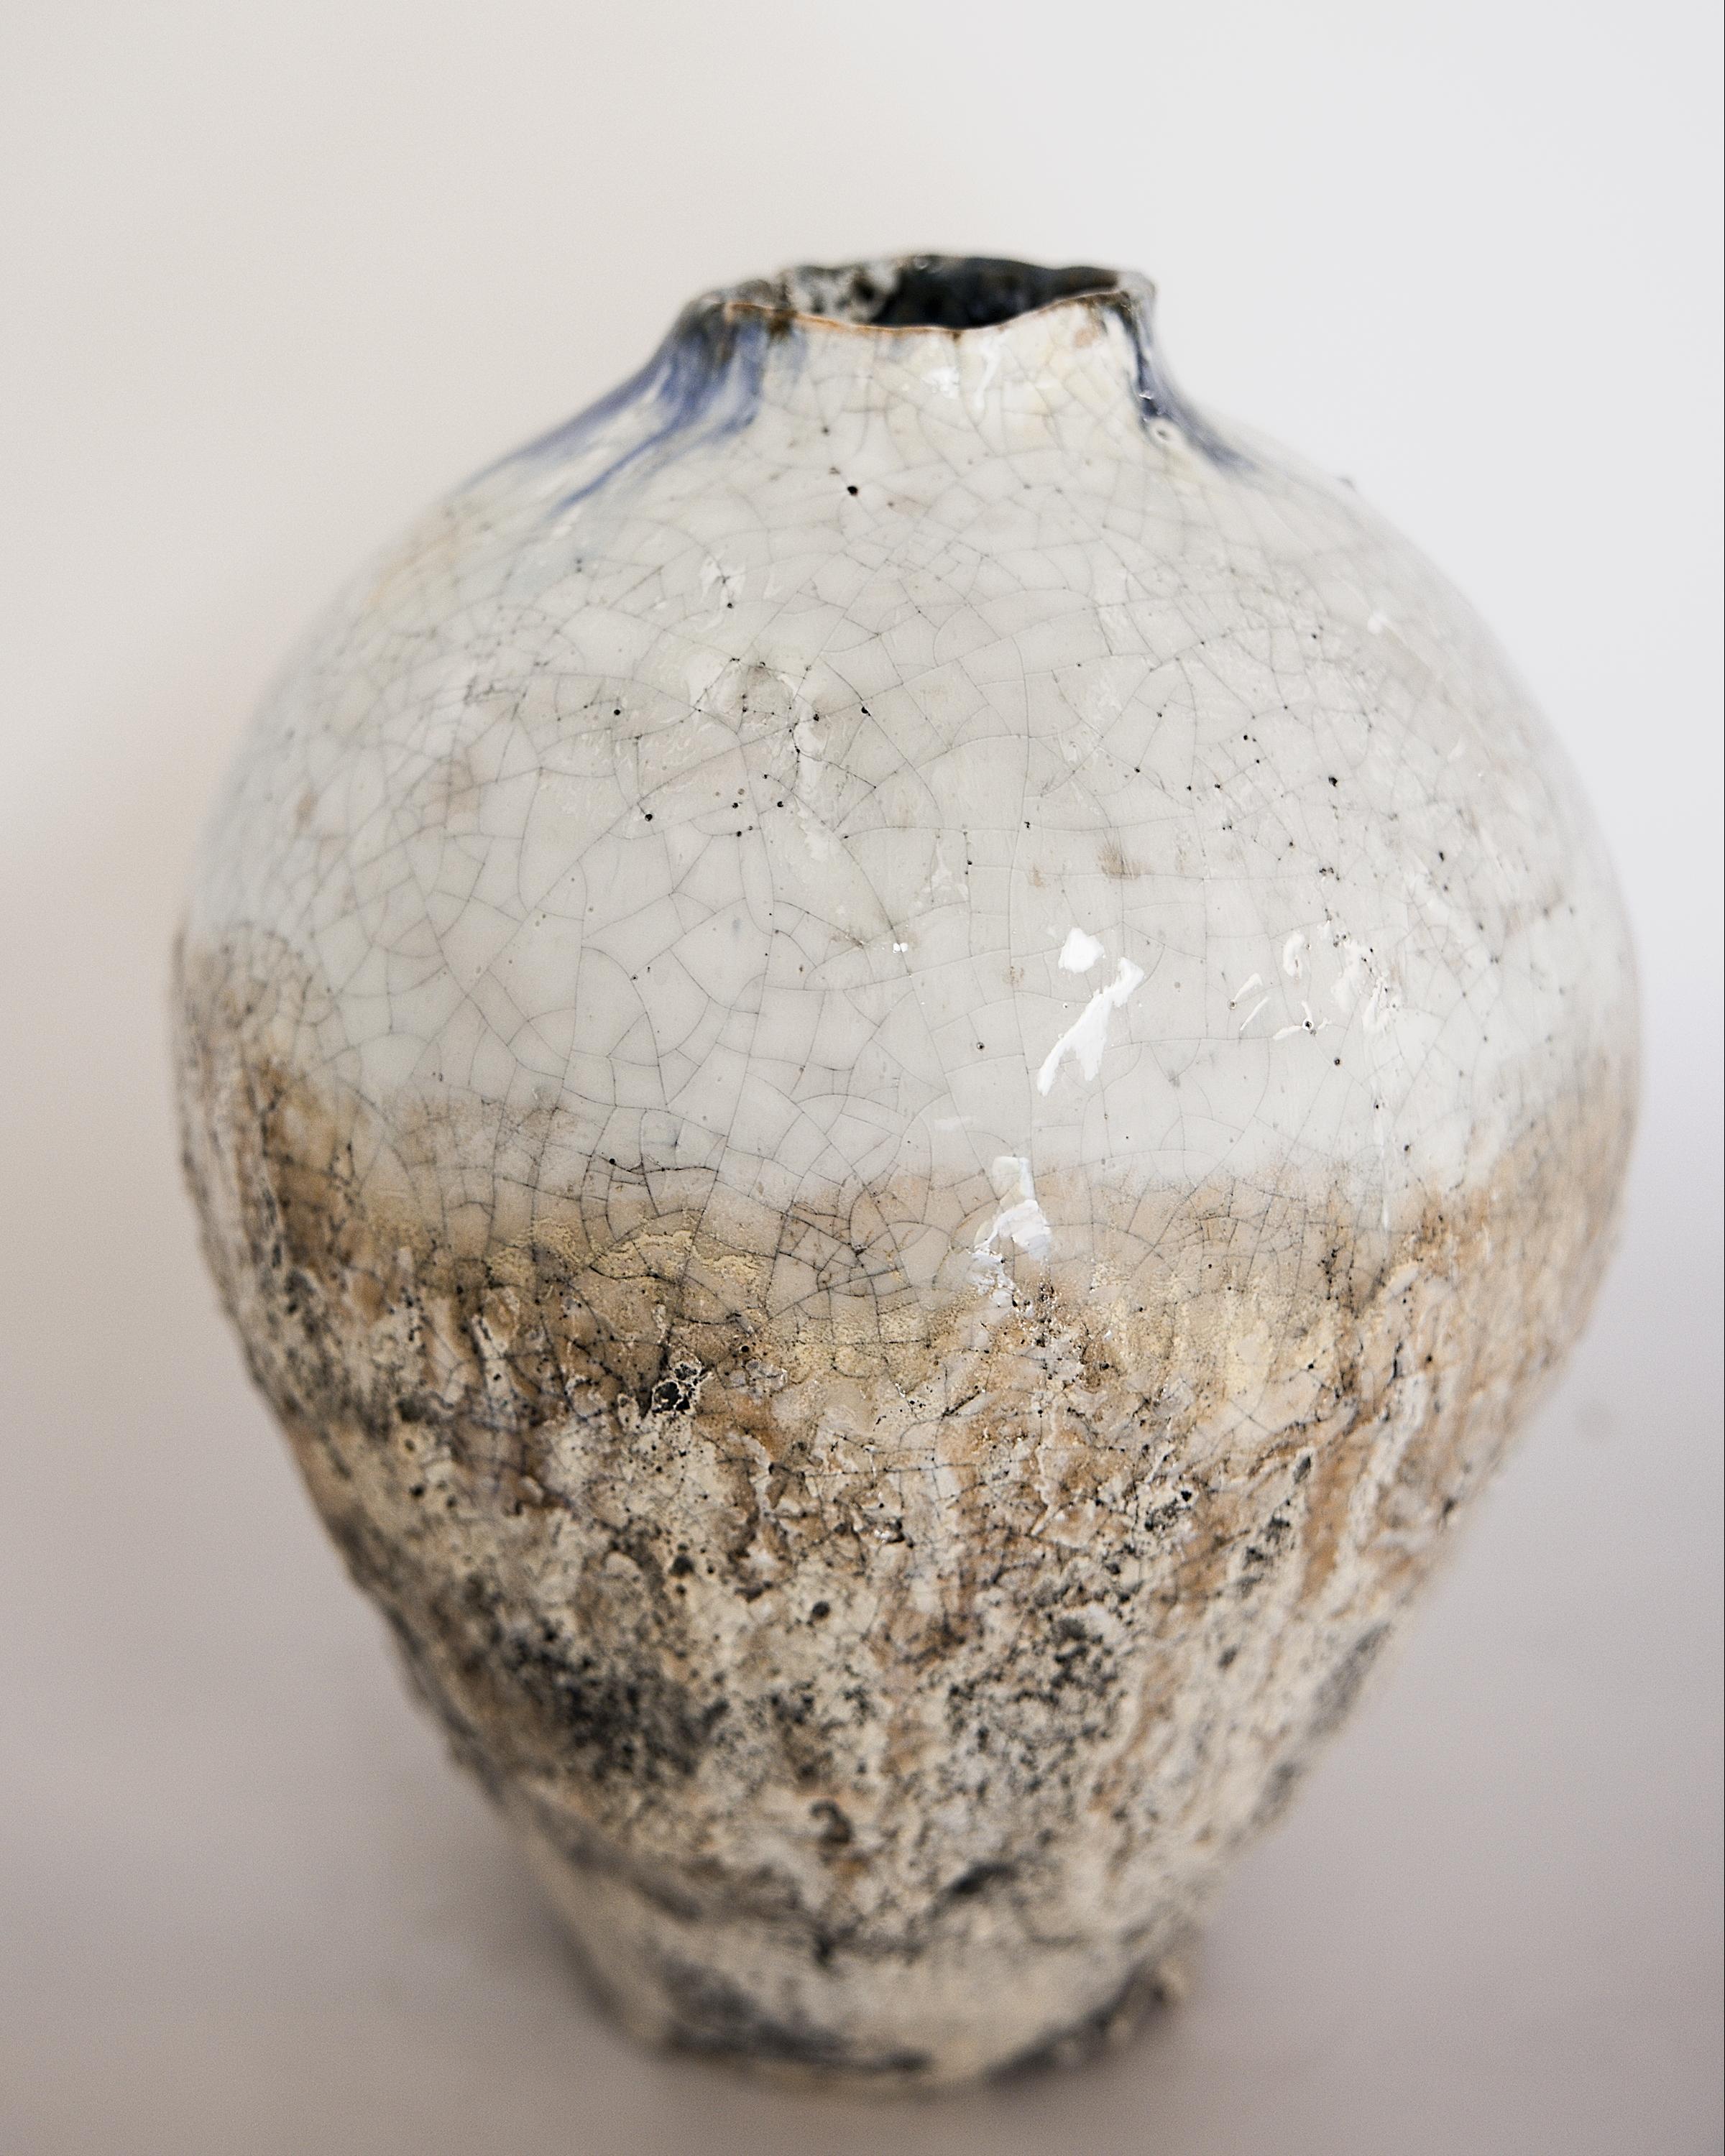 comes in Three sizes 
Vase 1: 10x8


this new line is Fresh nuetral  matte base with black cracks, Gloss white crackle glaze flowing on top

touch of navy oxidation on rim 

we love to create new modern organic textures on traditional shapes
please